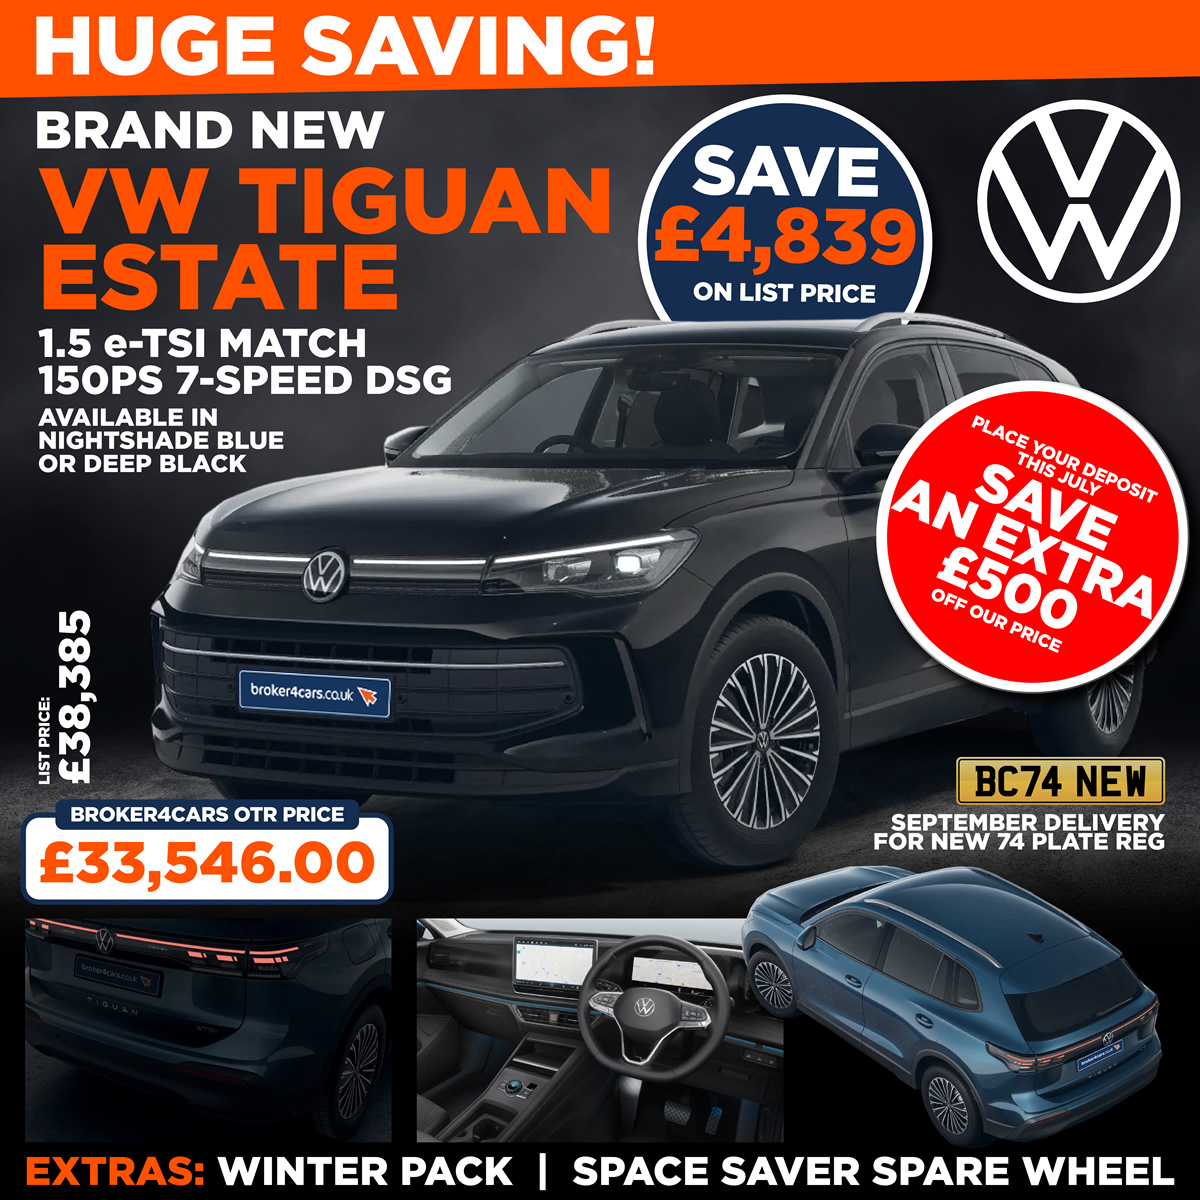 NEW VW TIGUAN ESTATE 1.5 e-TSI Match 150ps 7-speed DSG. Available in Nightshade Blue or Deep Black. Winter Pack. Space Saver Spare Wheel. VW's are currently due September for the new 74 plate registration. List Price £38,385.00 so saving £4,839. Broker4Cars Price £33,546 OTR. Place your deposit this July, save an extra £500